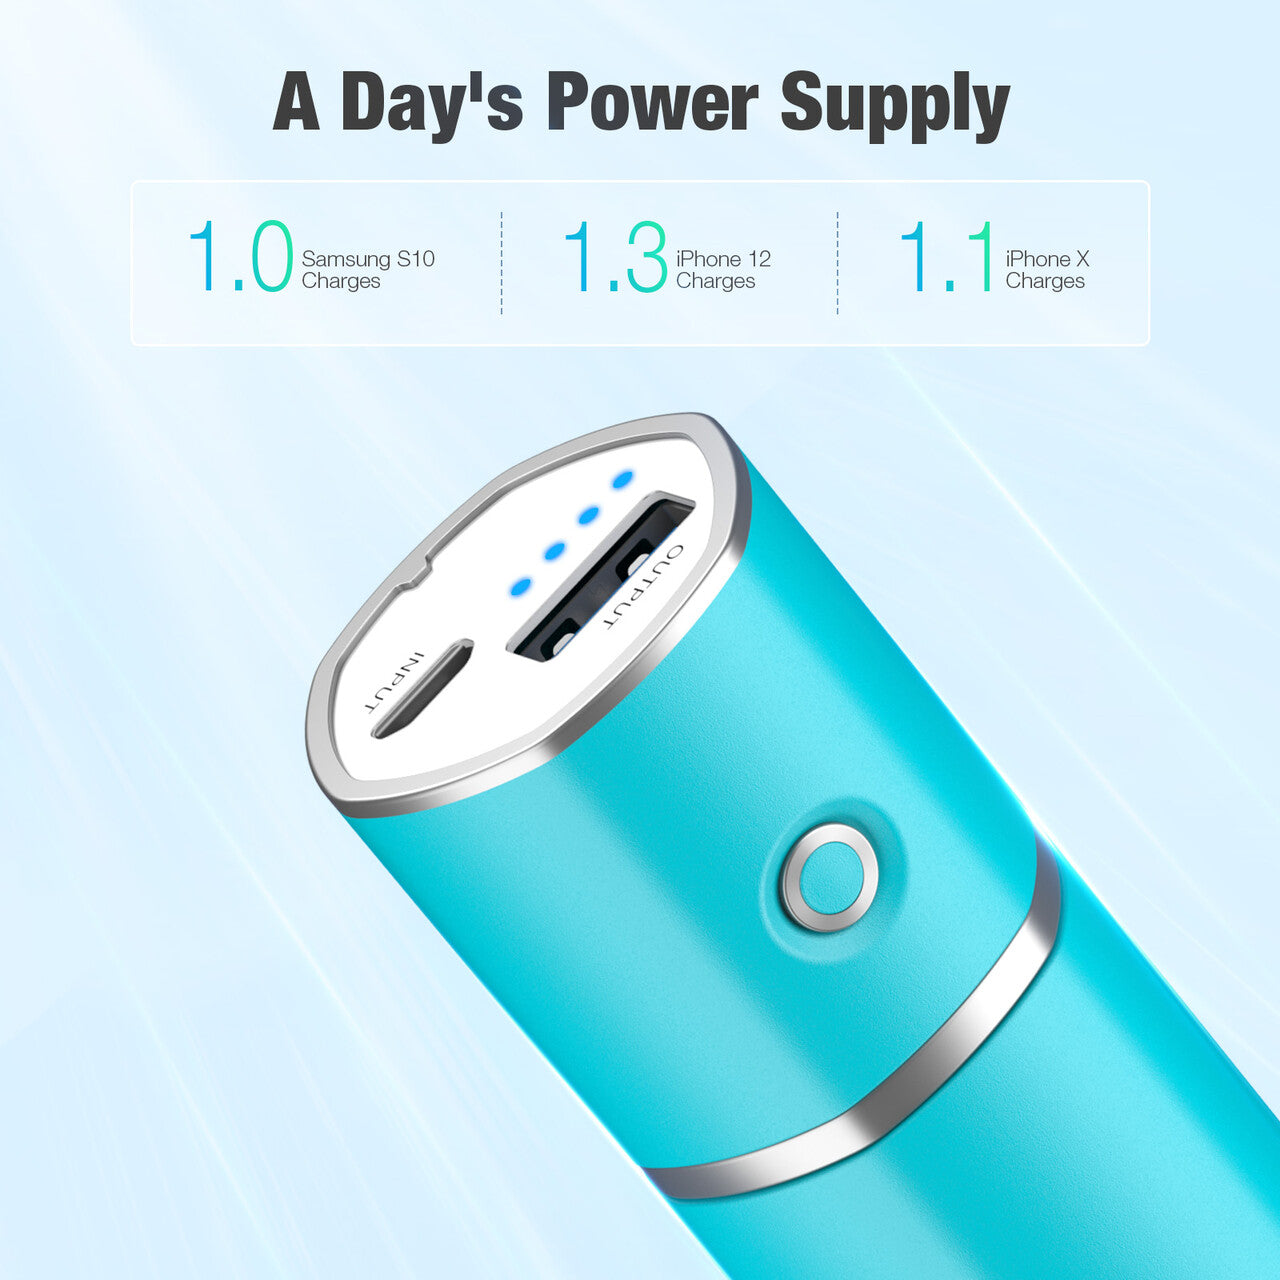 EnergyQC Slim 2 Portable Charger,Ultra-Compact 5000mAh Power Bank External Battery Compatible with iPhone,Samsung Galaxy,Airpods and More-Blue